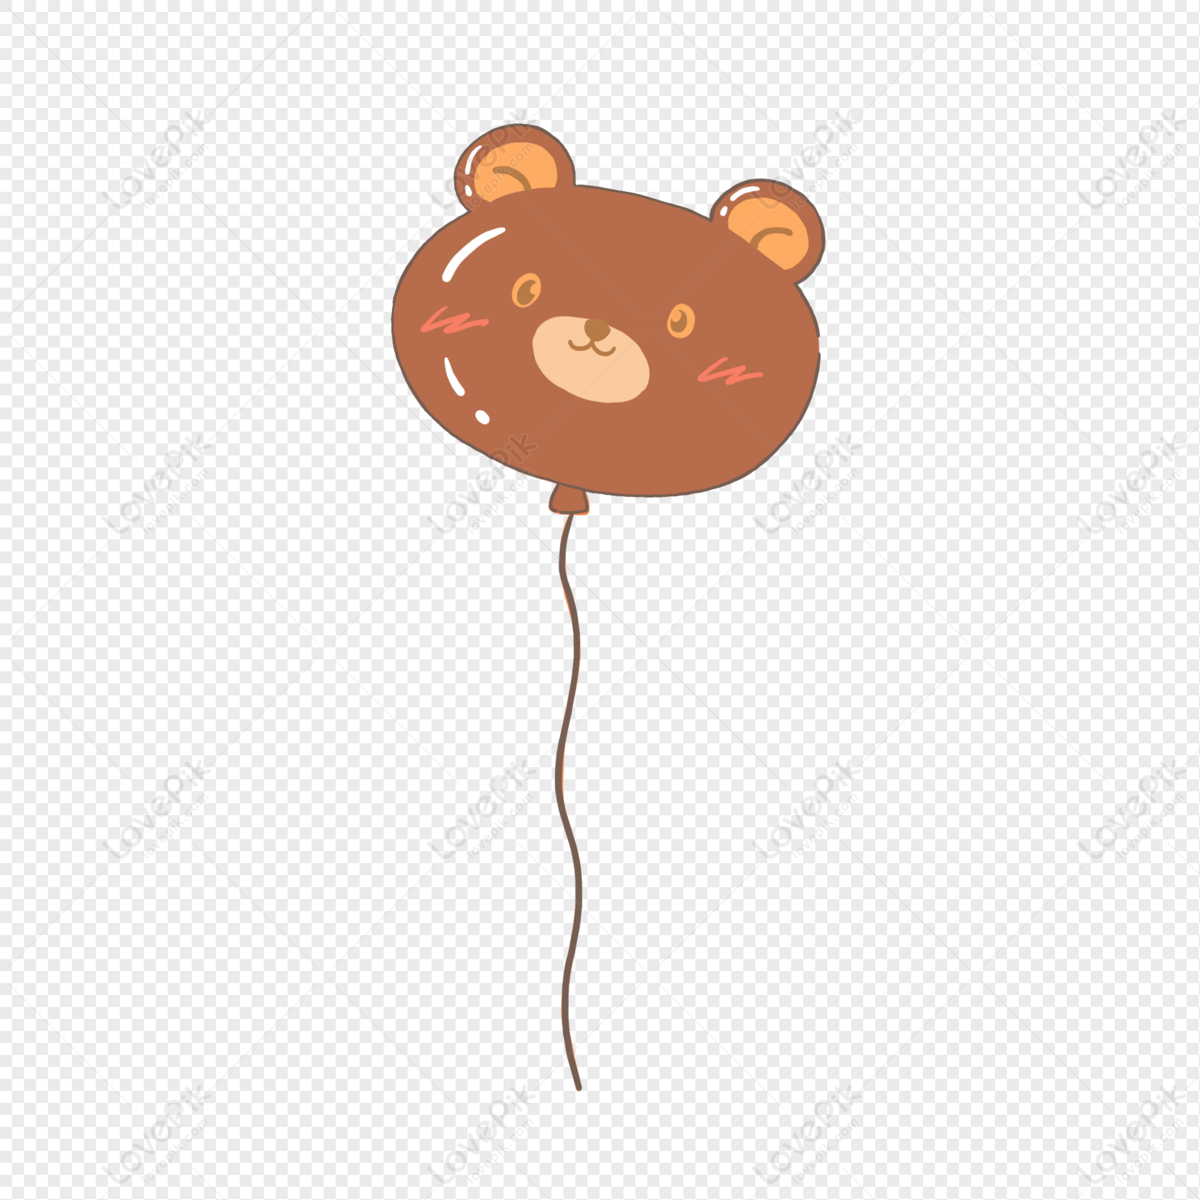 Cartoon Bear Balloon PNG Image And Clipart Image For Free Download -  Lovepik | 401224888